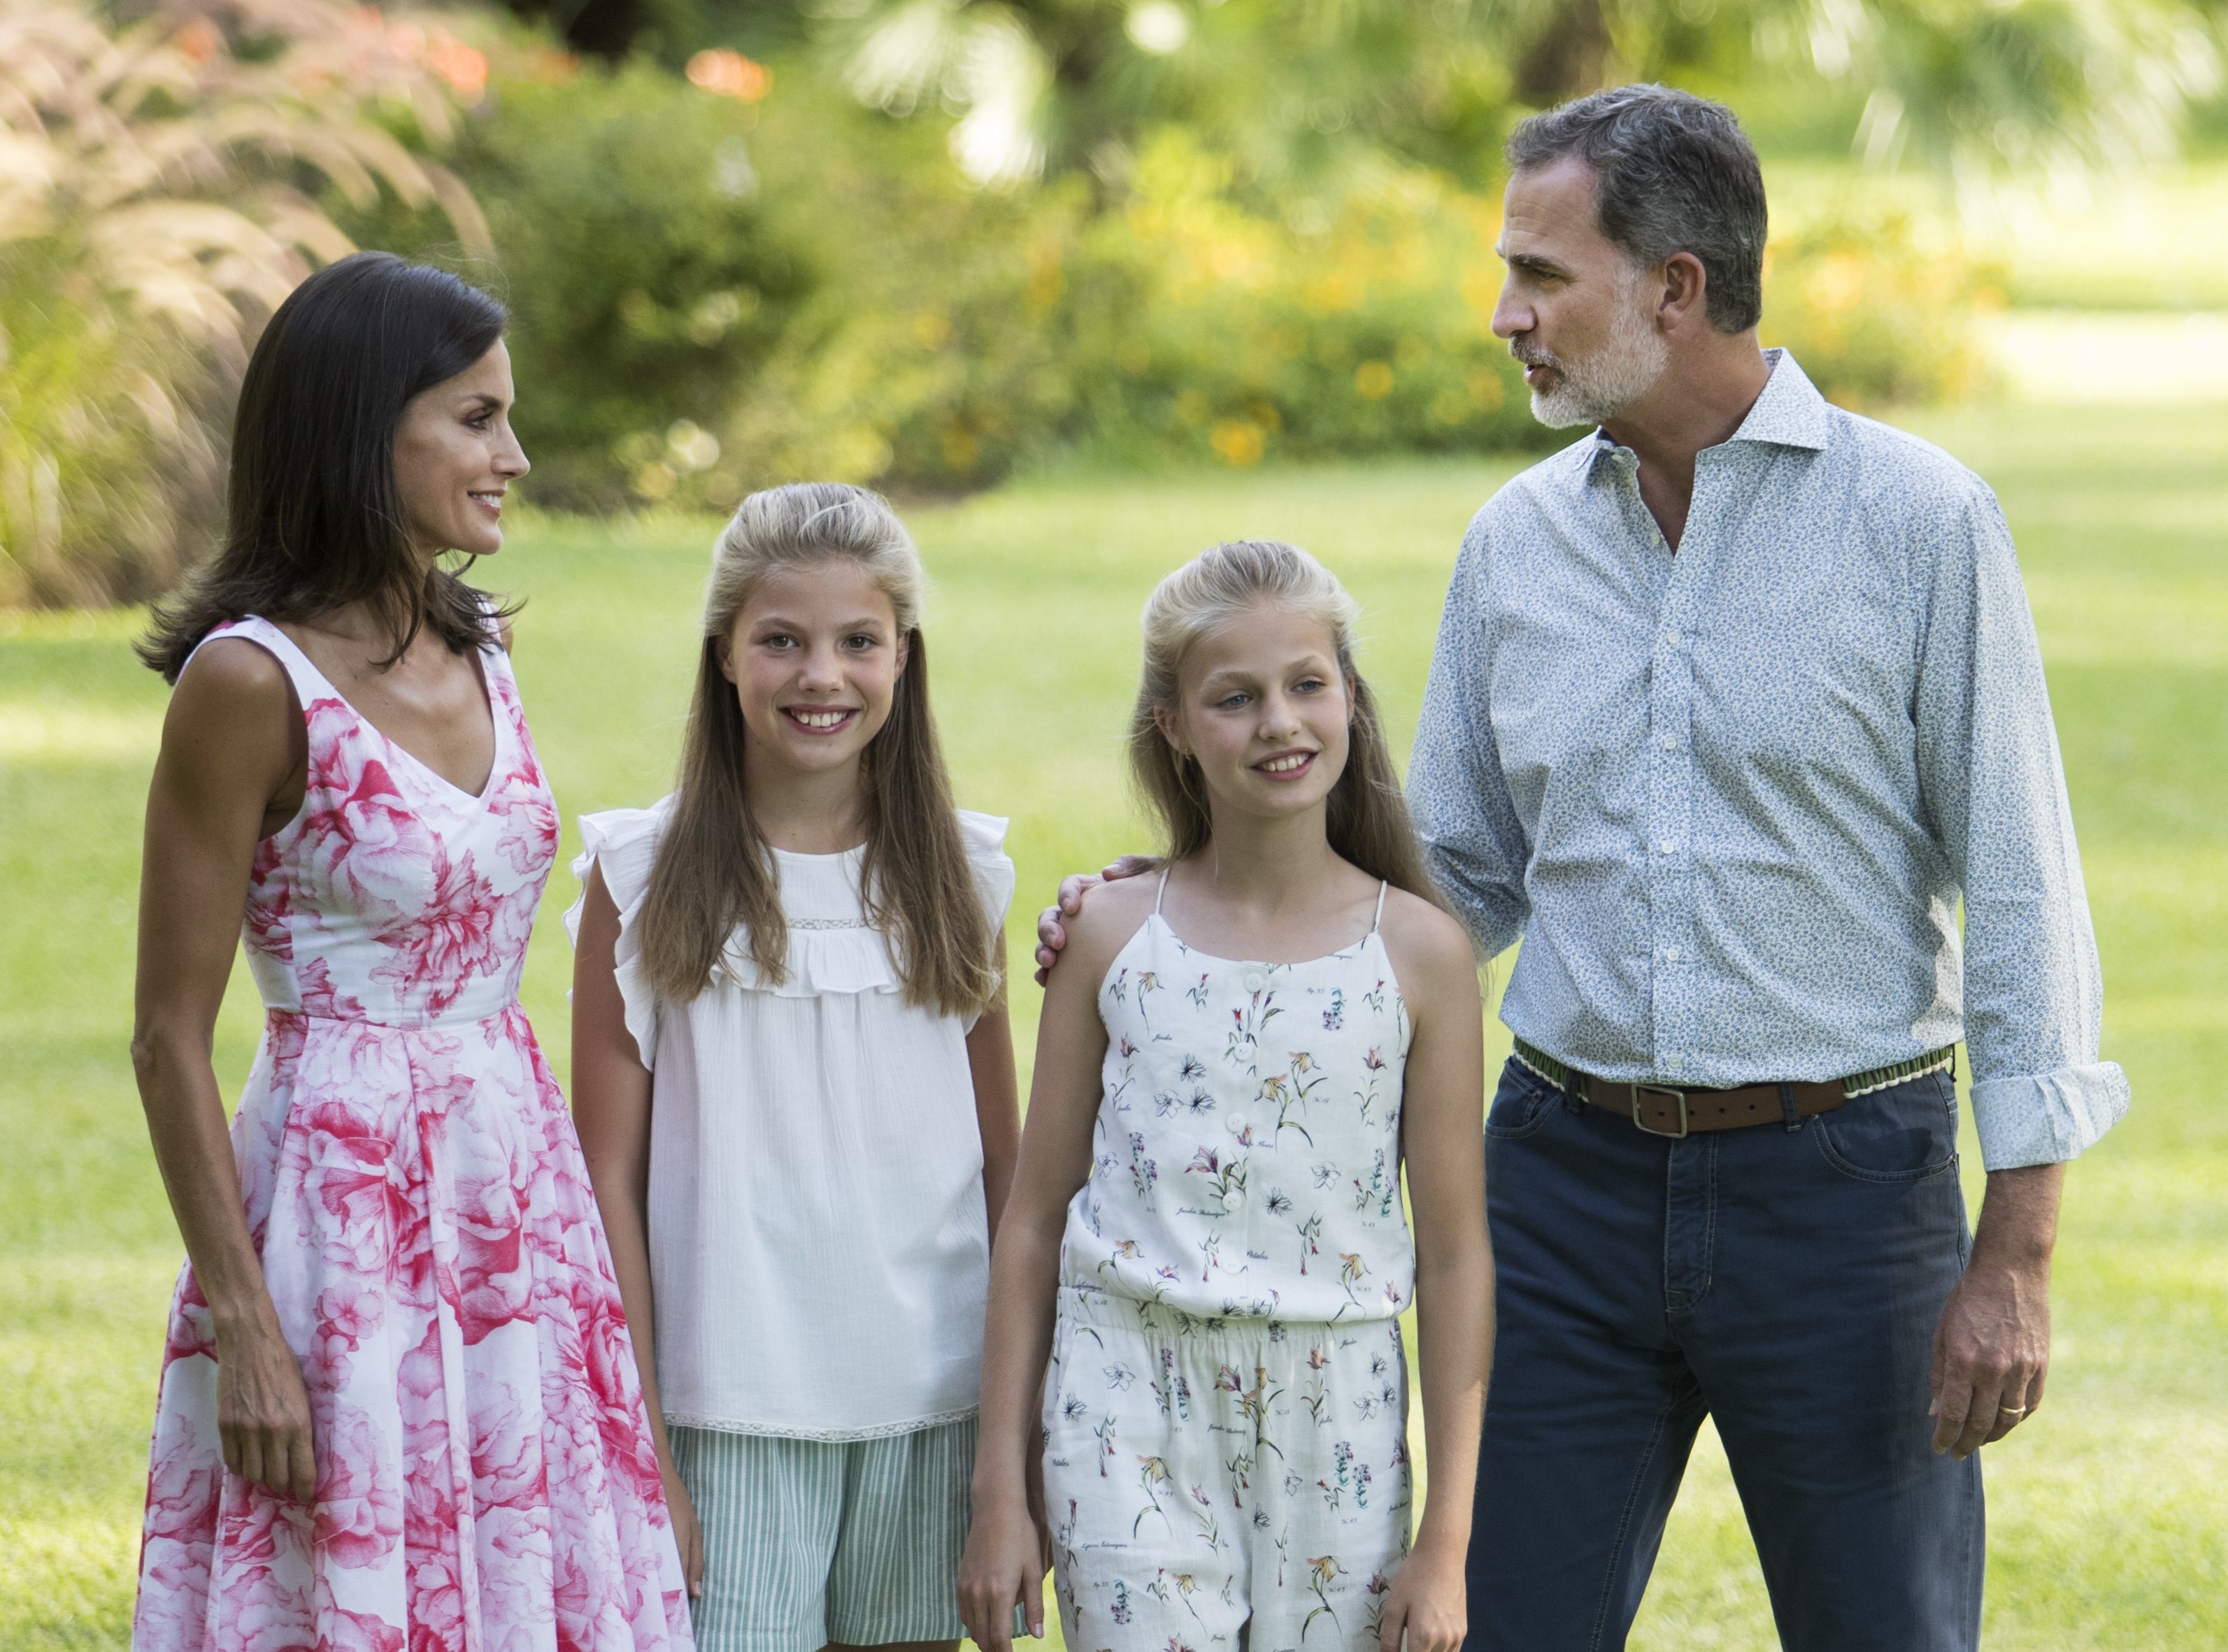 King Felipe VI and Queen Letizia posing with their daughters Spanish Crown Princess Leonor (R) and Princess Sofia in the gardens at the Marivent palace on the island of Majorca on August 4, 2019. / Source: Getty Images